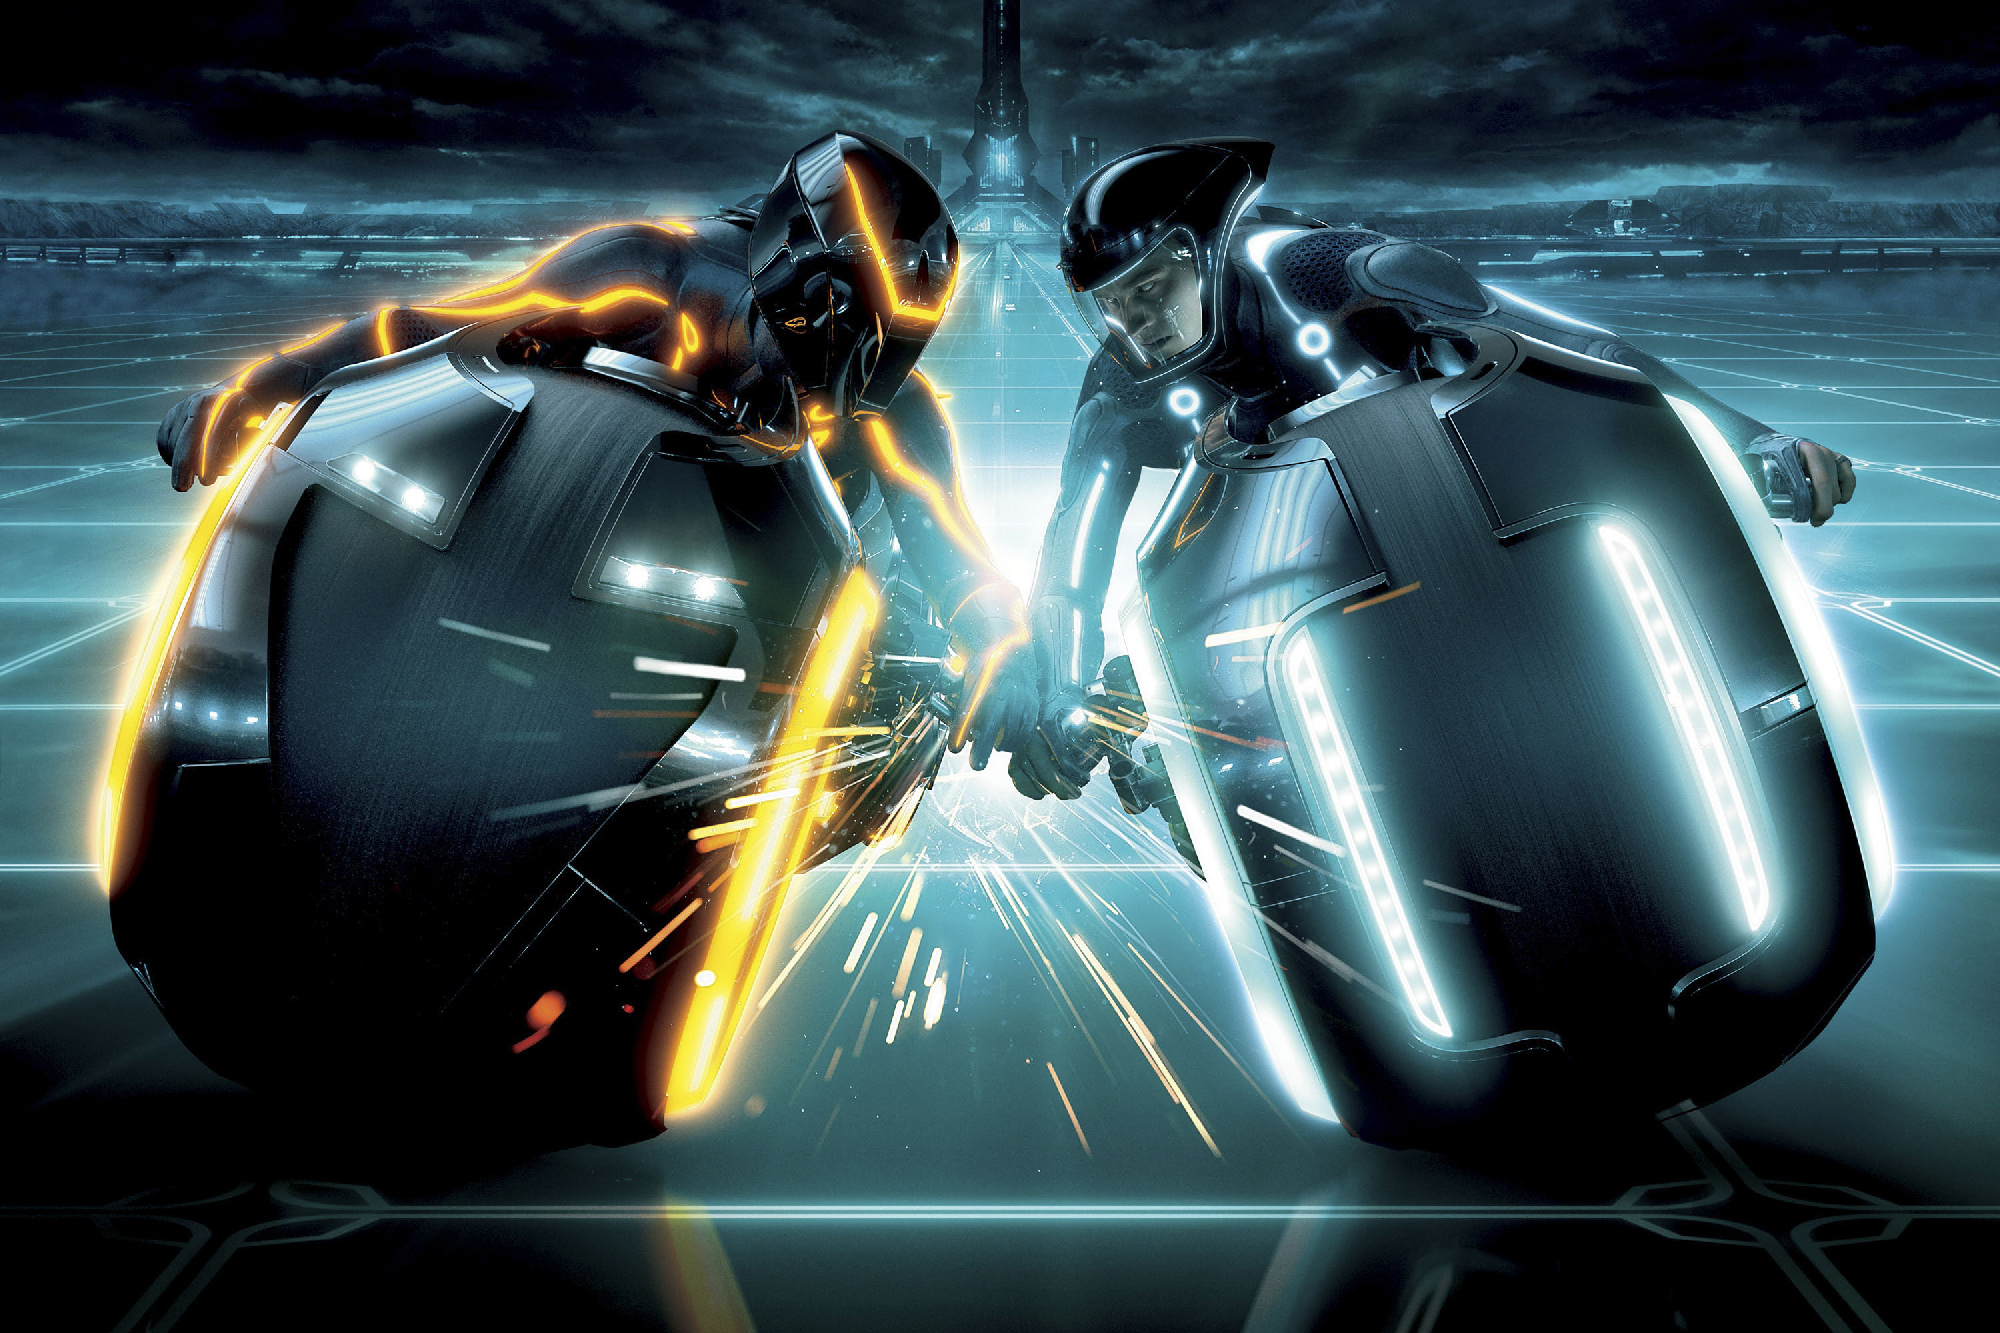 A scene from 'Tron: Legacy'